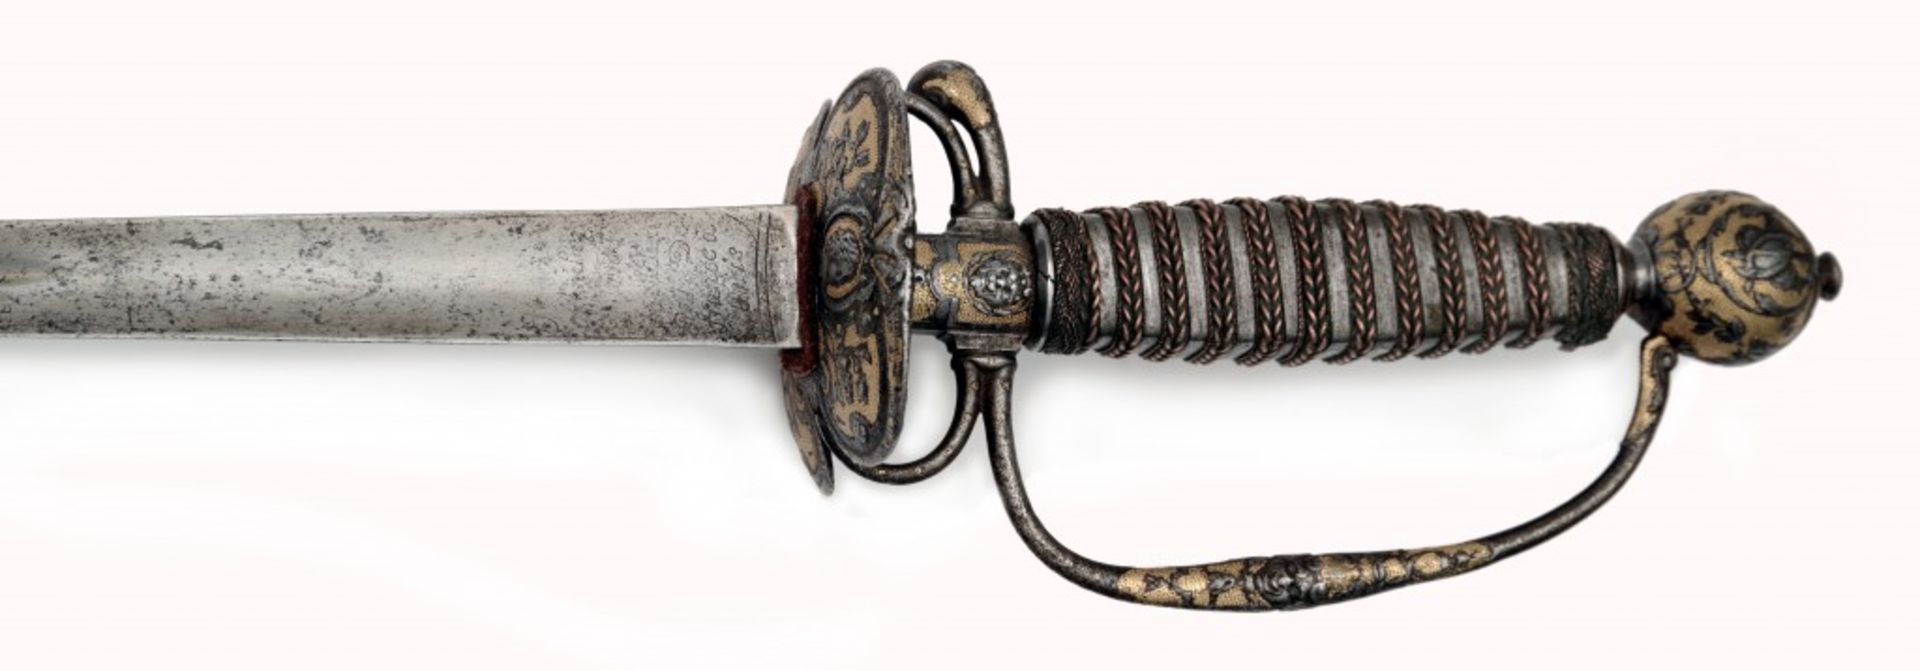 A French Gilt Small-sword with Chiselled Hilt by Jean Louis Guyon the Elder - Image 2 of 11